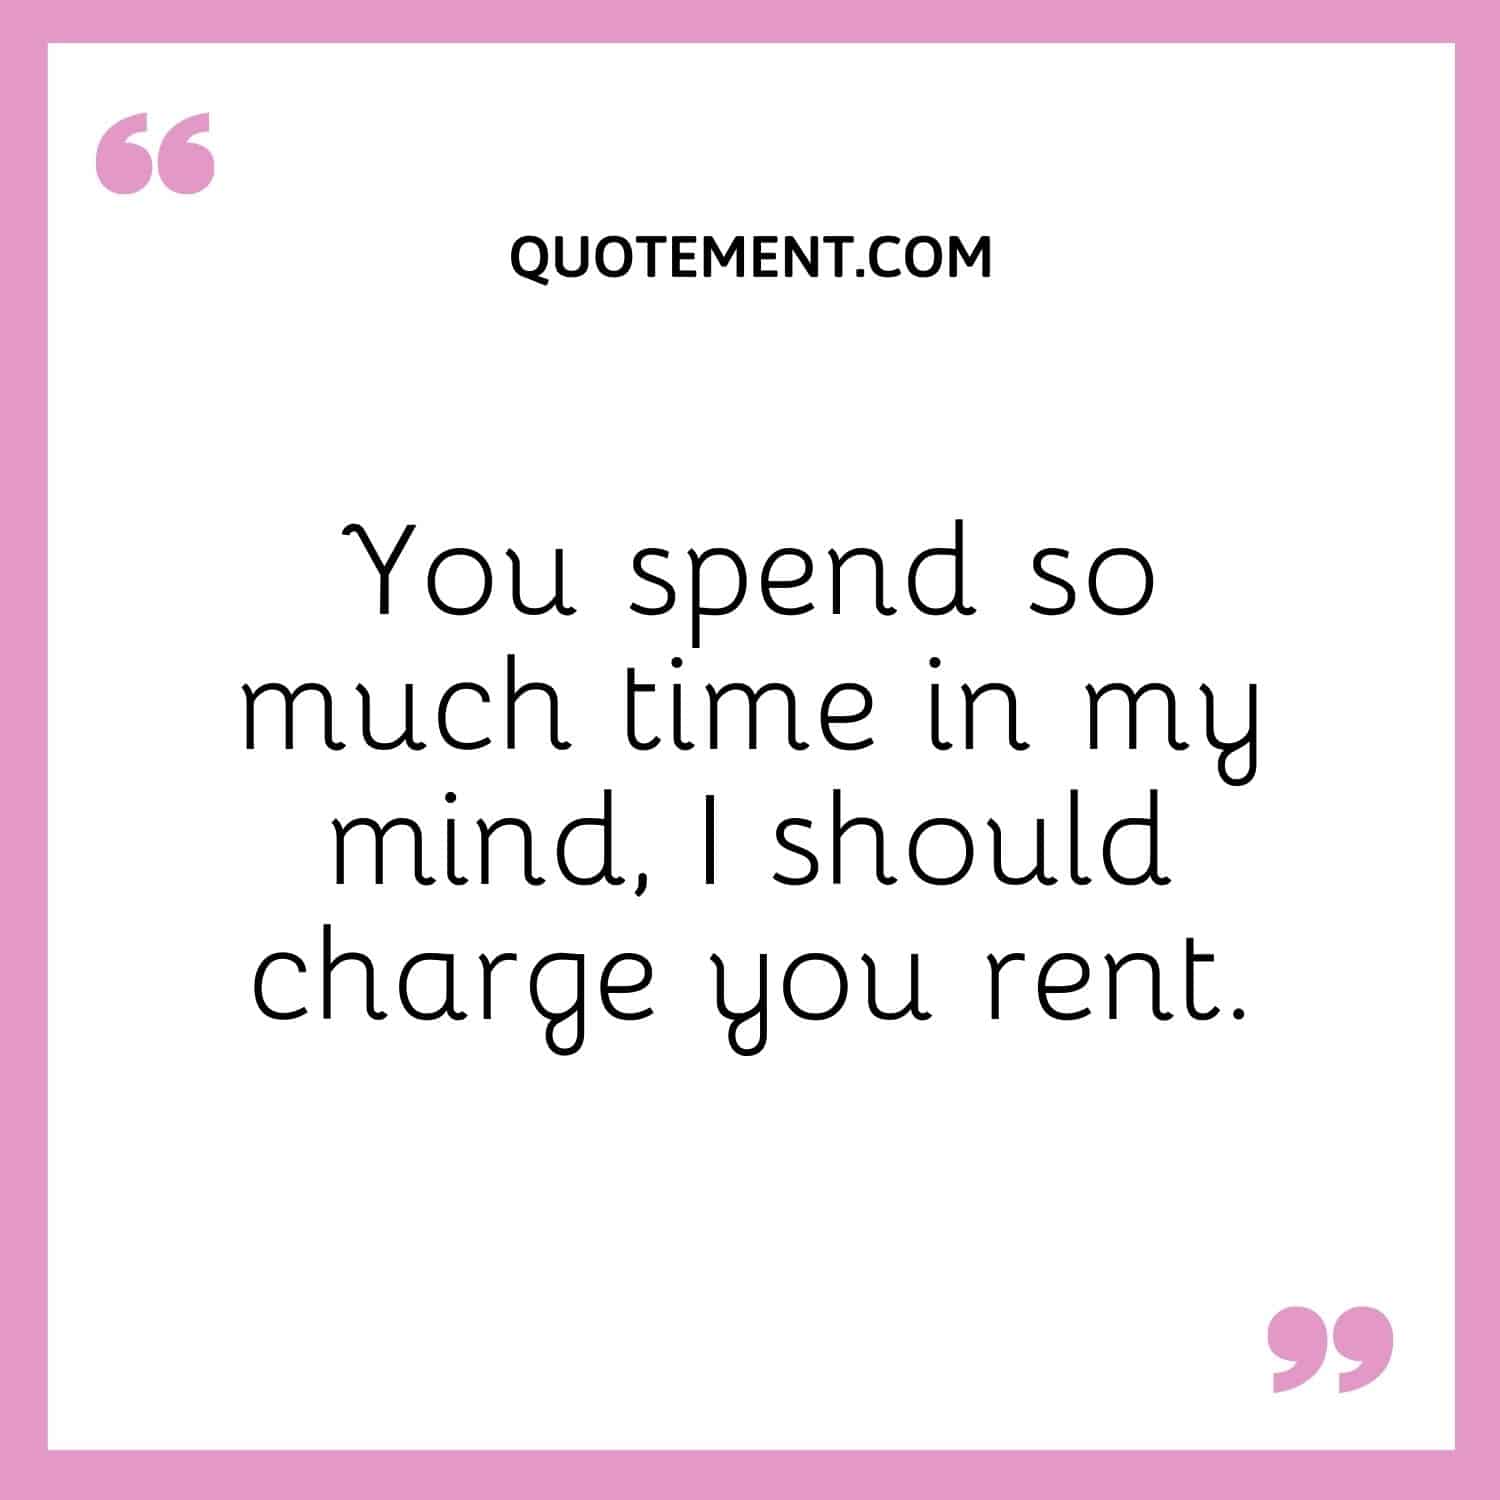 You spend so much time in my mind, I should charge you rent